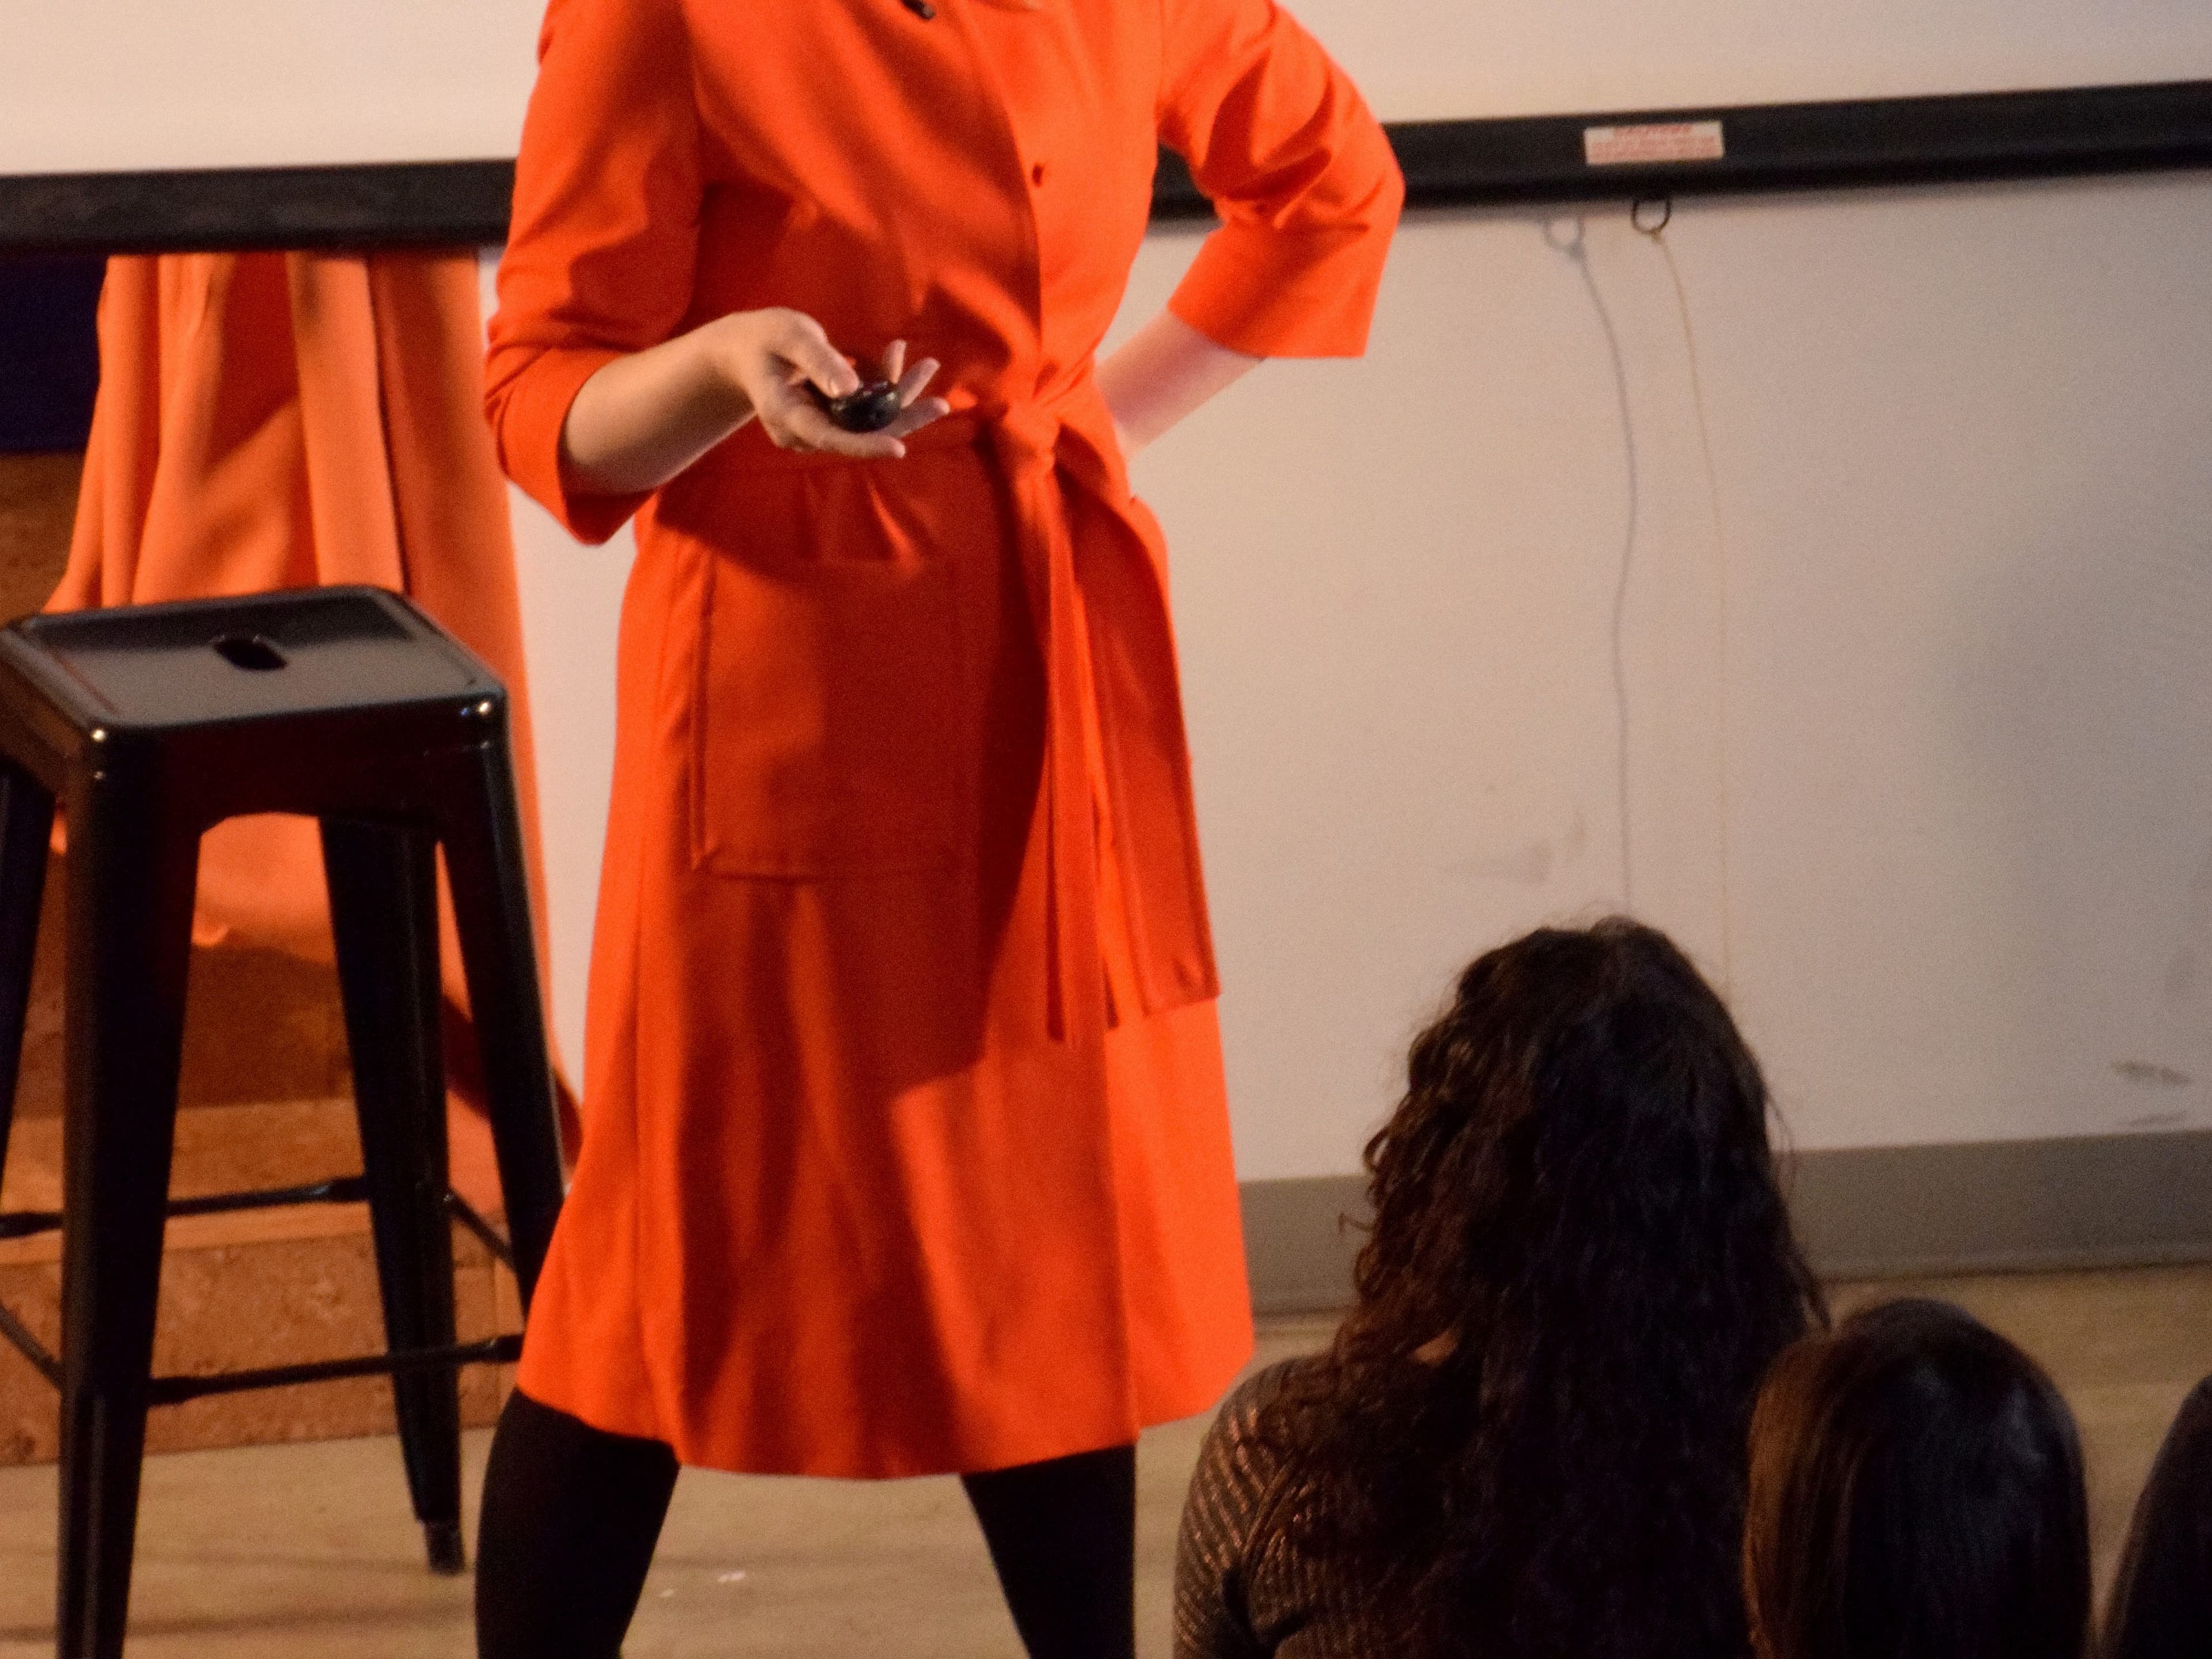 A woman in an orange dress is giving a presentation. She appears to be speaking passionately, holding a small device in one hand, with the other hand on her hip. She is standing in front of an audience seated indoors, with a stool and a projected screen behind her.